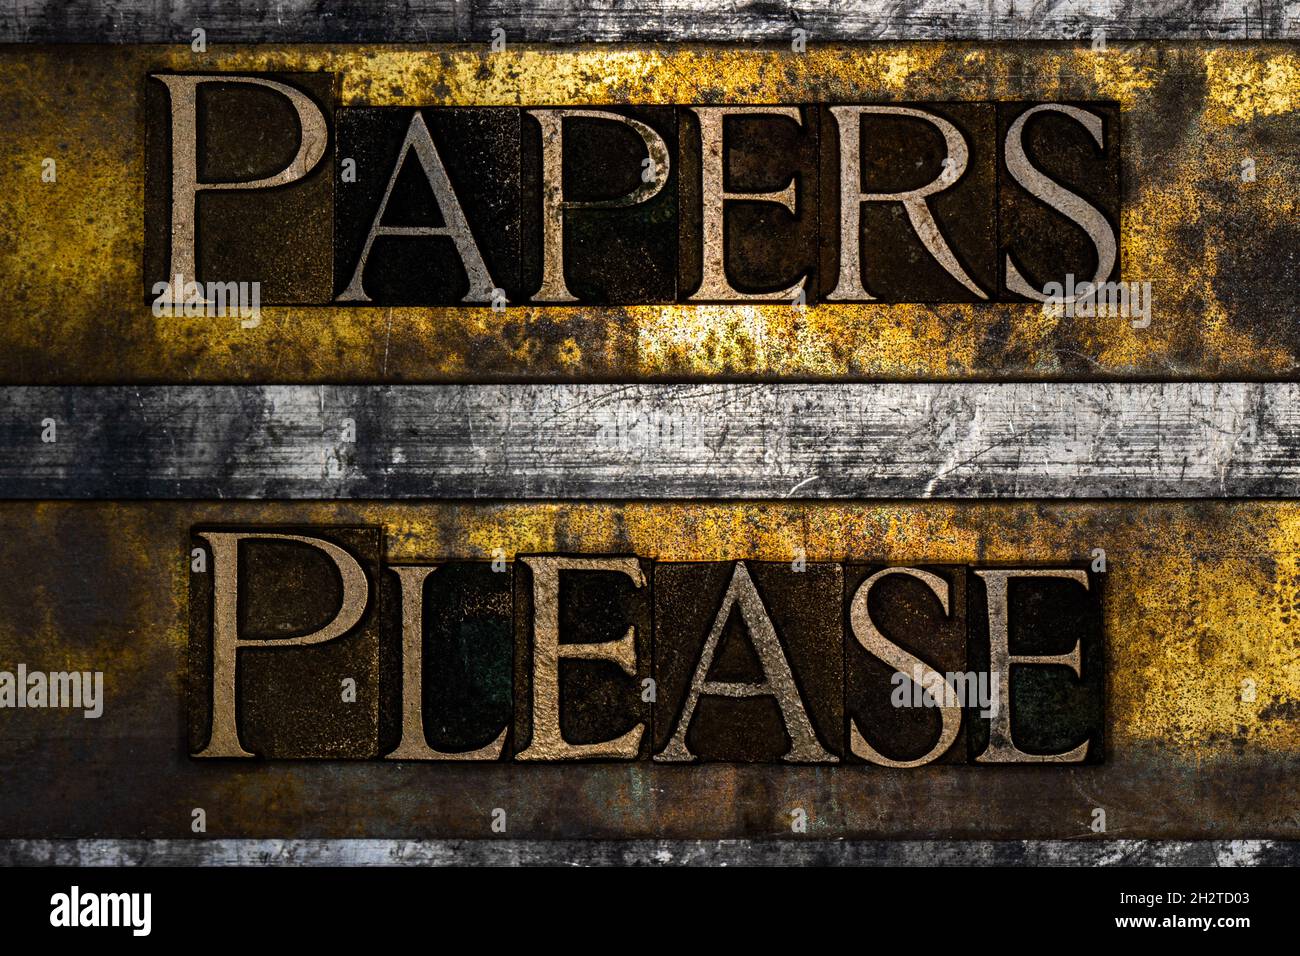 Papers Please text on textured grunge copper and vintage gold background Stock Photo